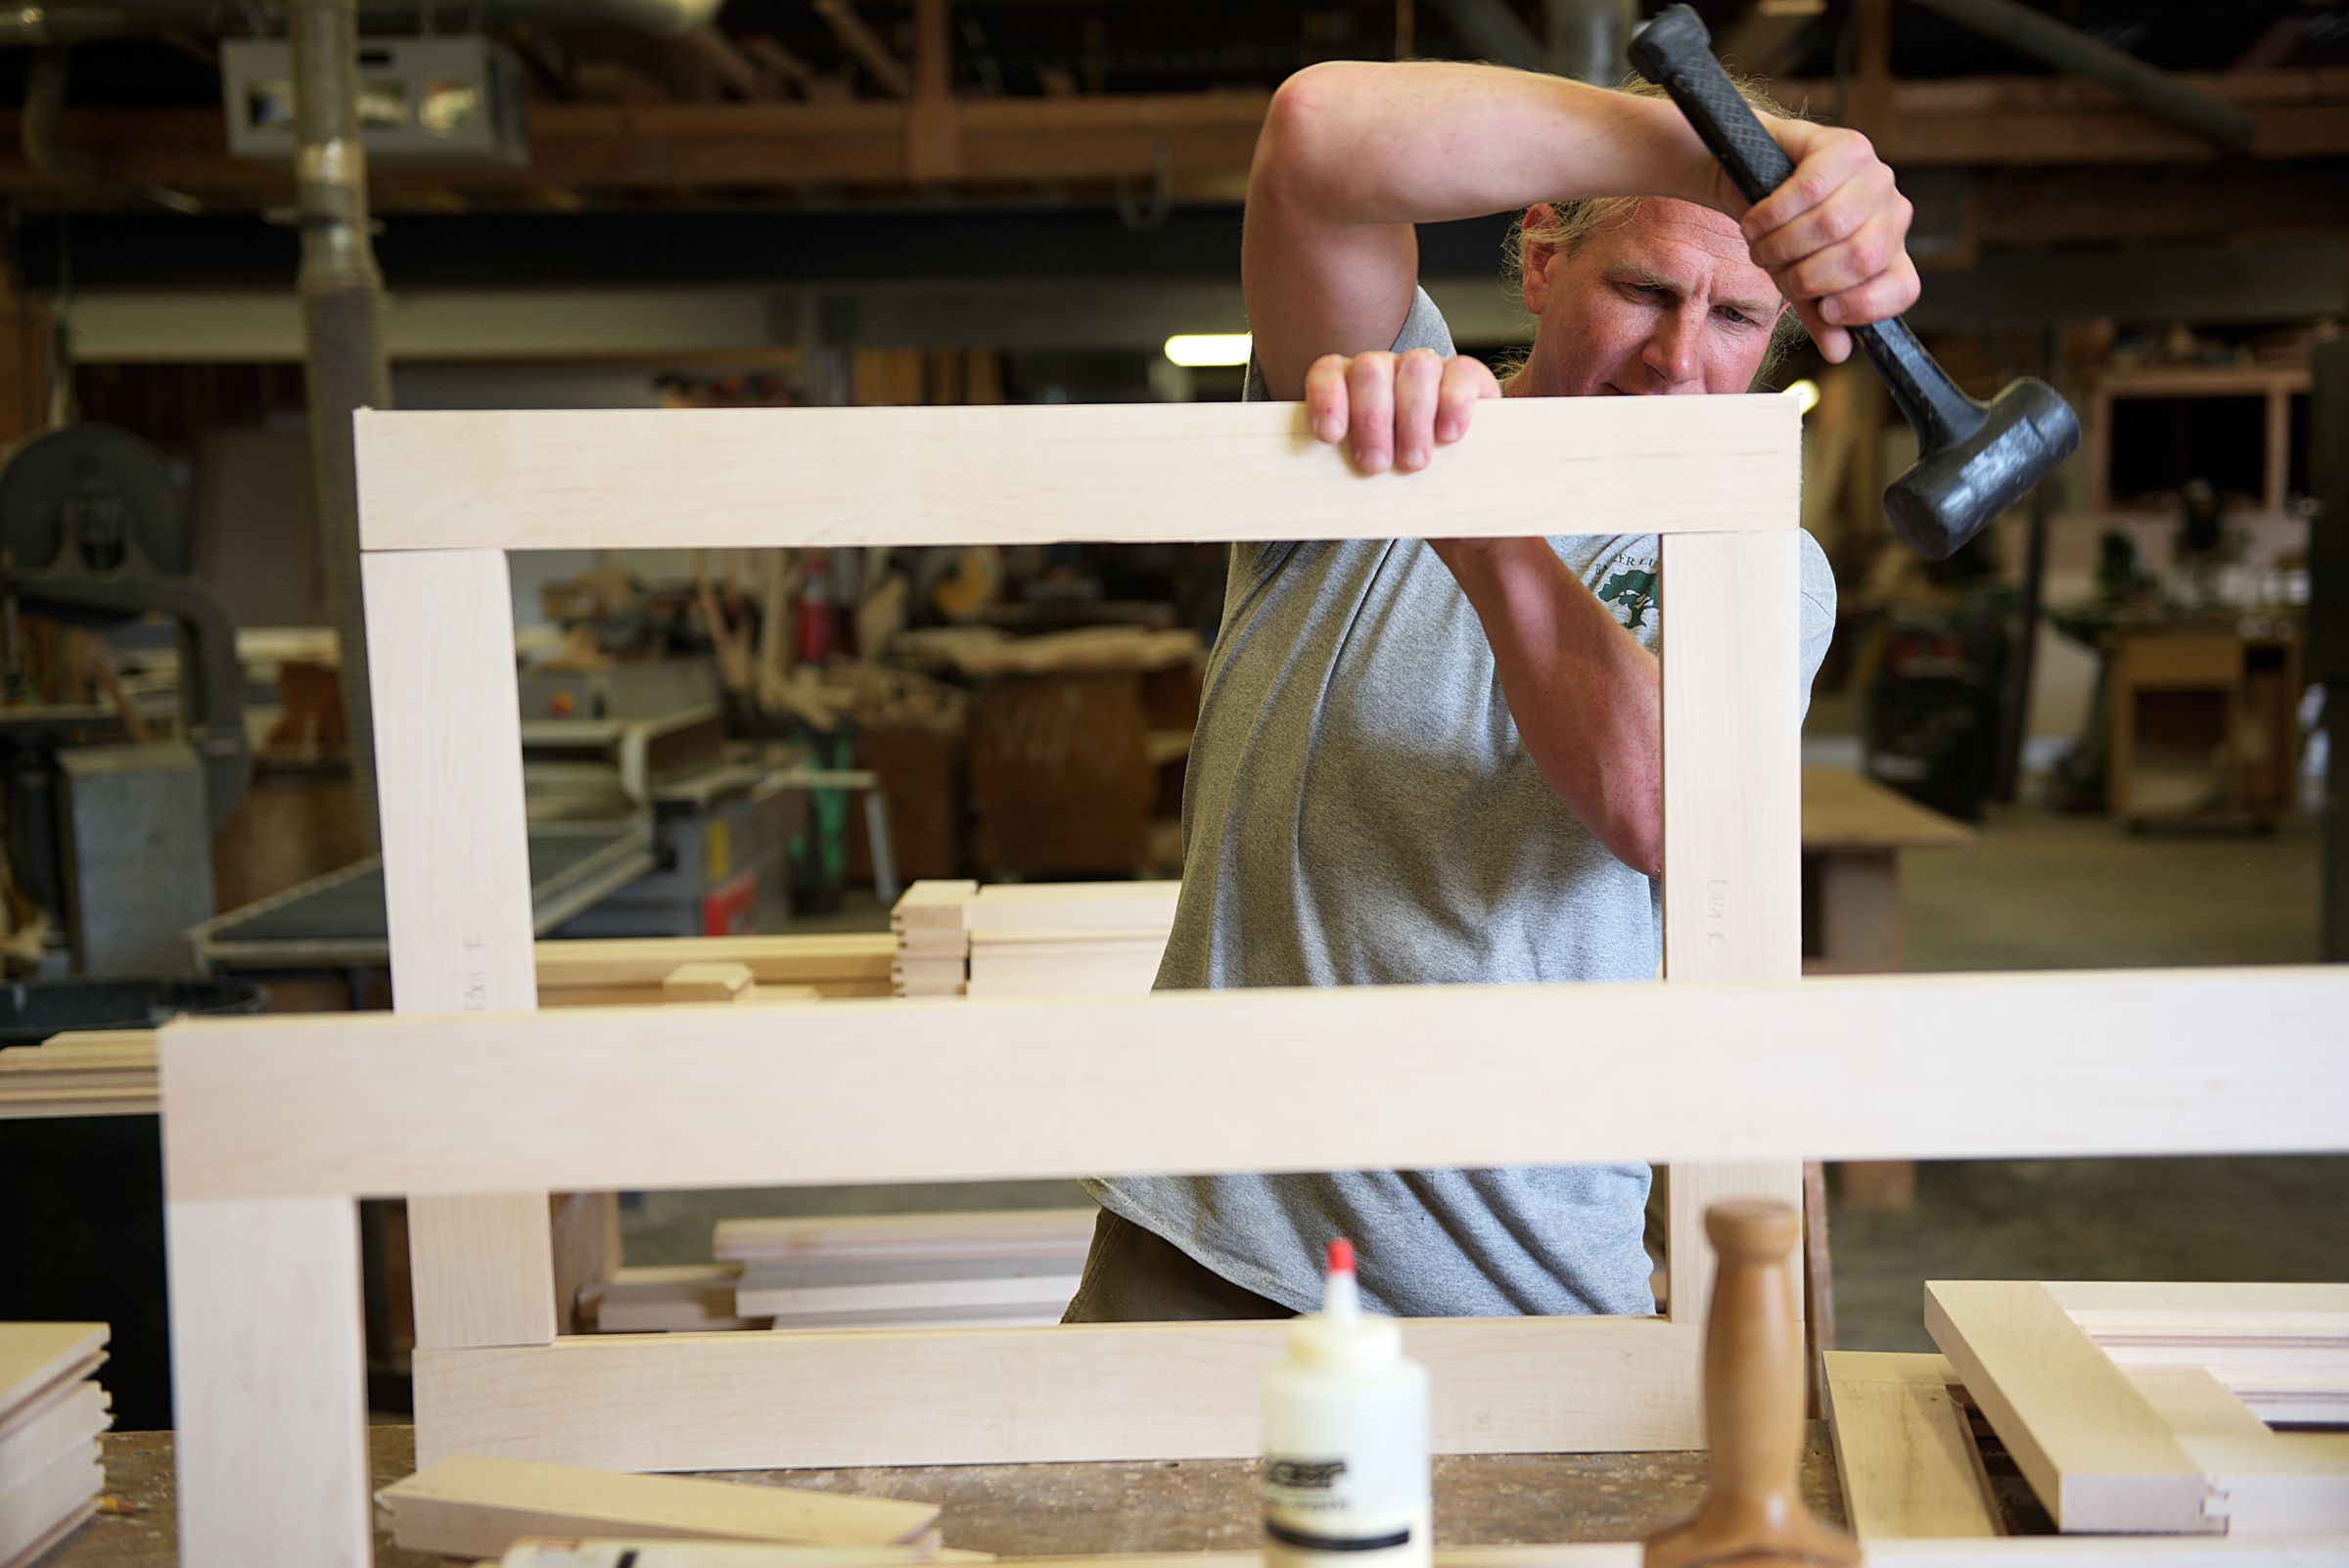 Cabinet maker Andy Mulligan fits together the frame of a cabinet door for a residential customer in the carpentry shop of Trumbull-Nelson Construction Company in Hanover, N.H., where he has worked a total of ten years, Thursday, September 15, 2017. Trumbull-Nelson is celebrating 100 years since its founding in 1917. (Valley News - James M. Patterson) Copyright Valley News. May not be reprinted or used online without permission. Send requests to permission@vnews.com.